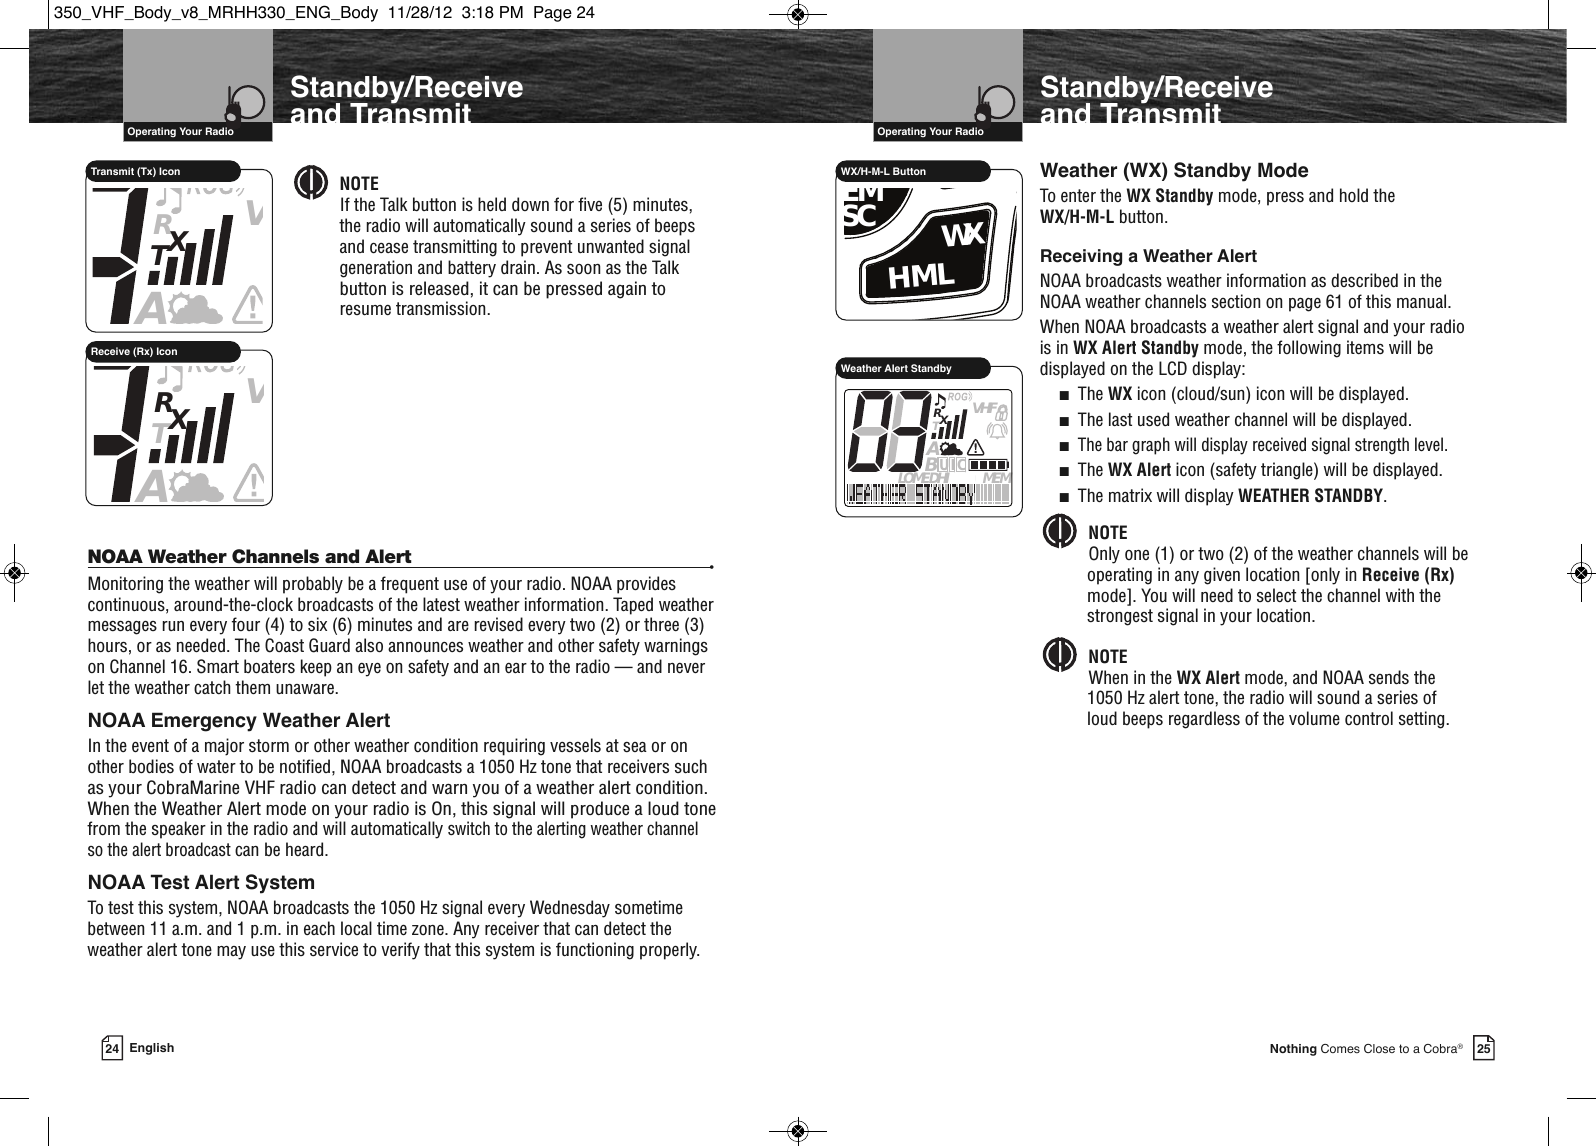 Page 15 of Cobra Electronics MRHH350 MARINE TRANSCEIVER User Manual MRHH330 ENG Body